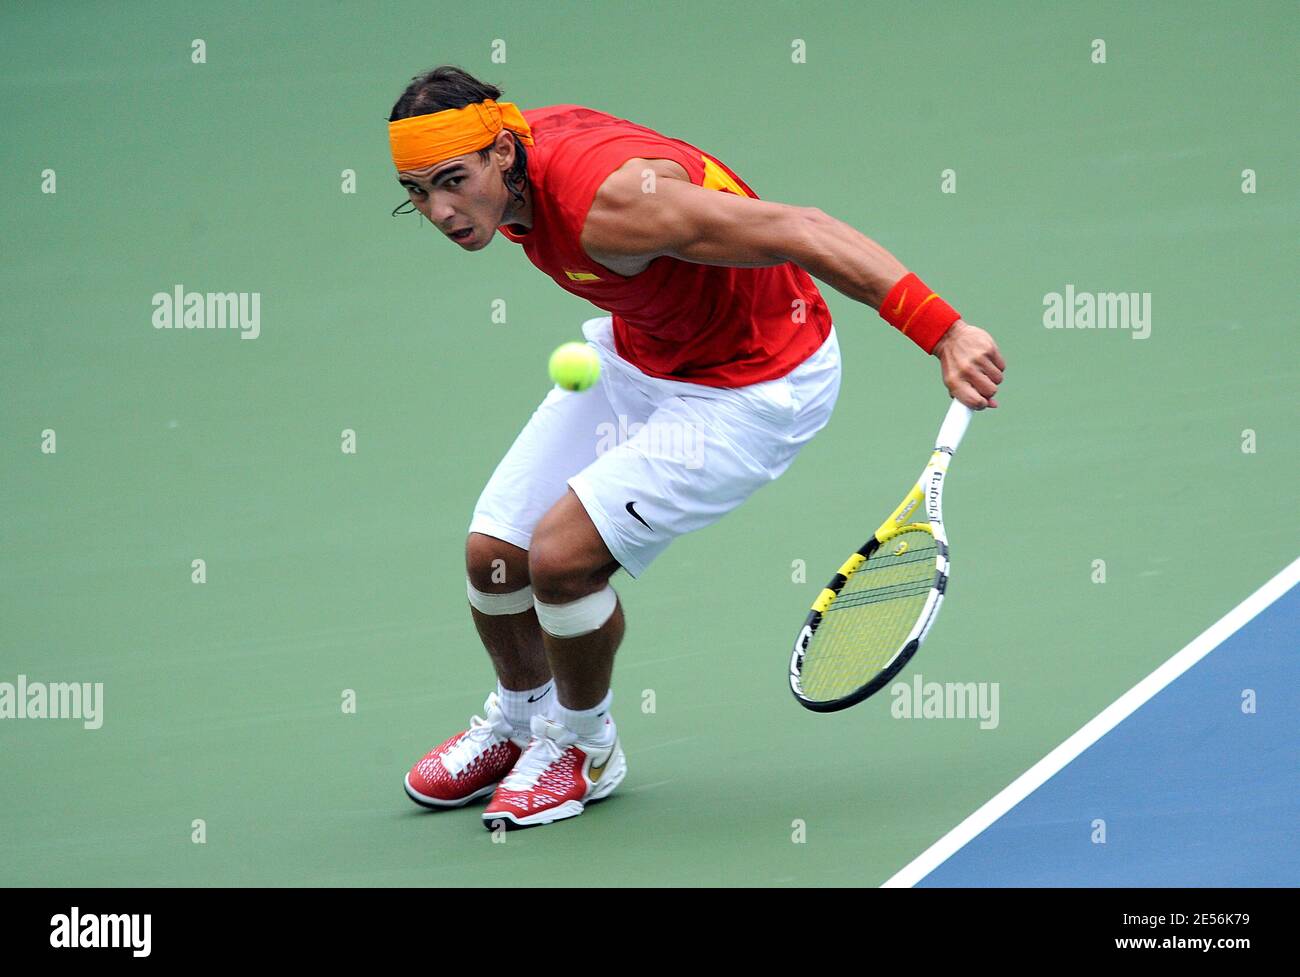 Spain's Rafael Nadal against Italy's Potito Starace in their first round of  the tennis qualification at